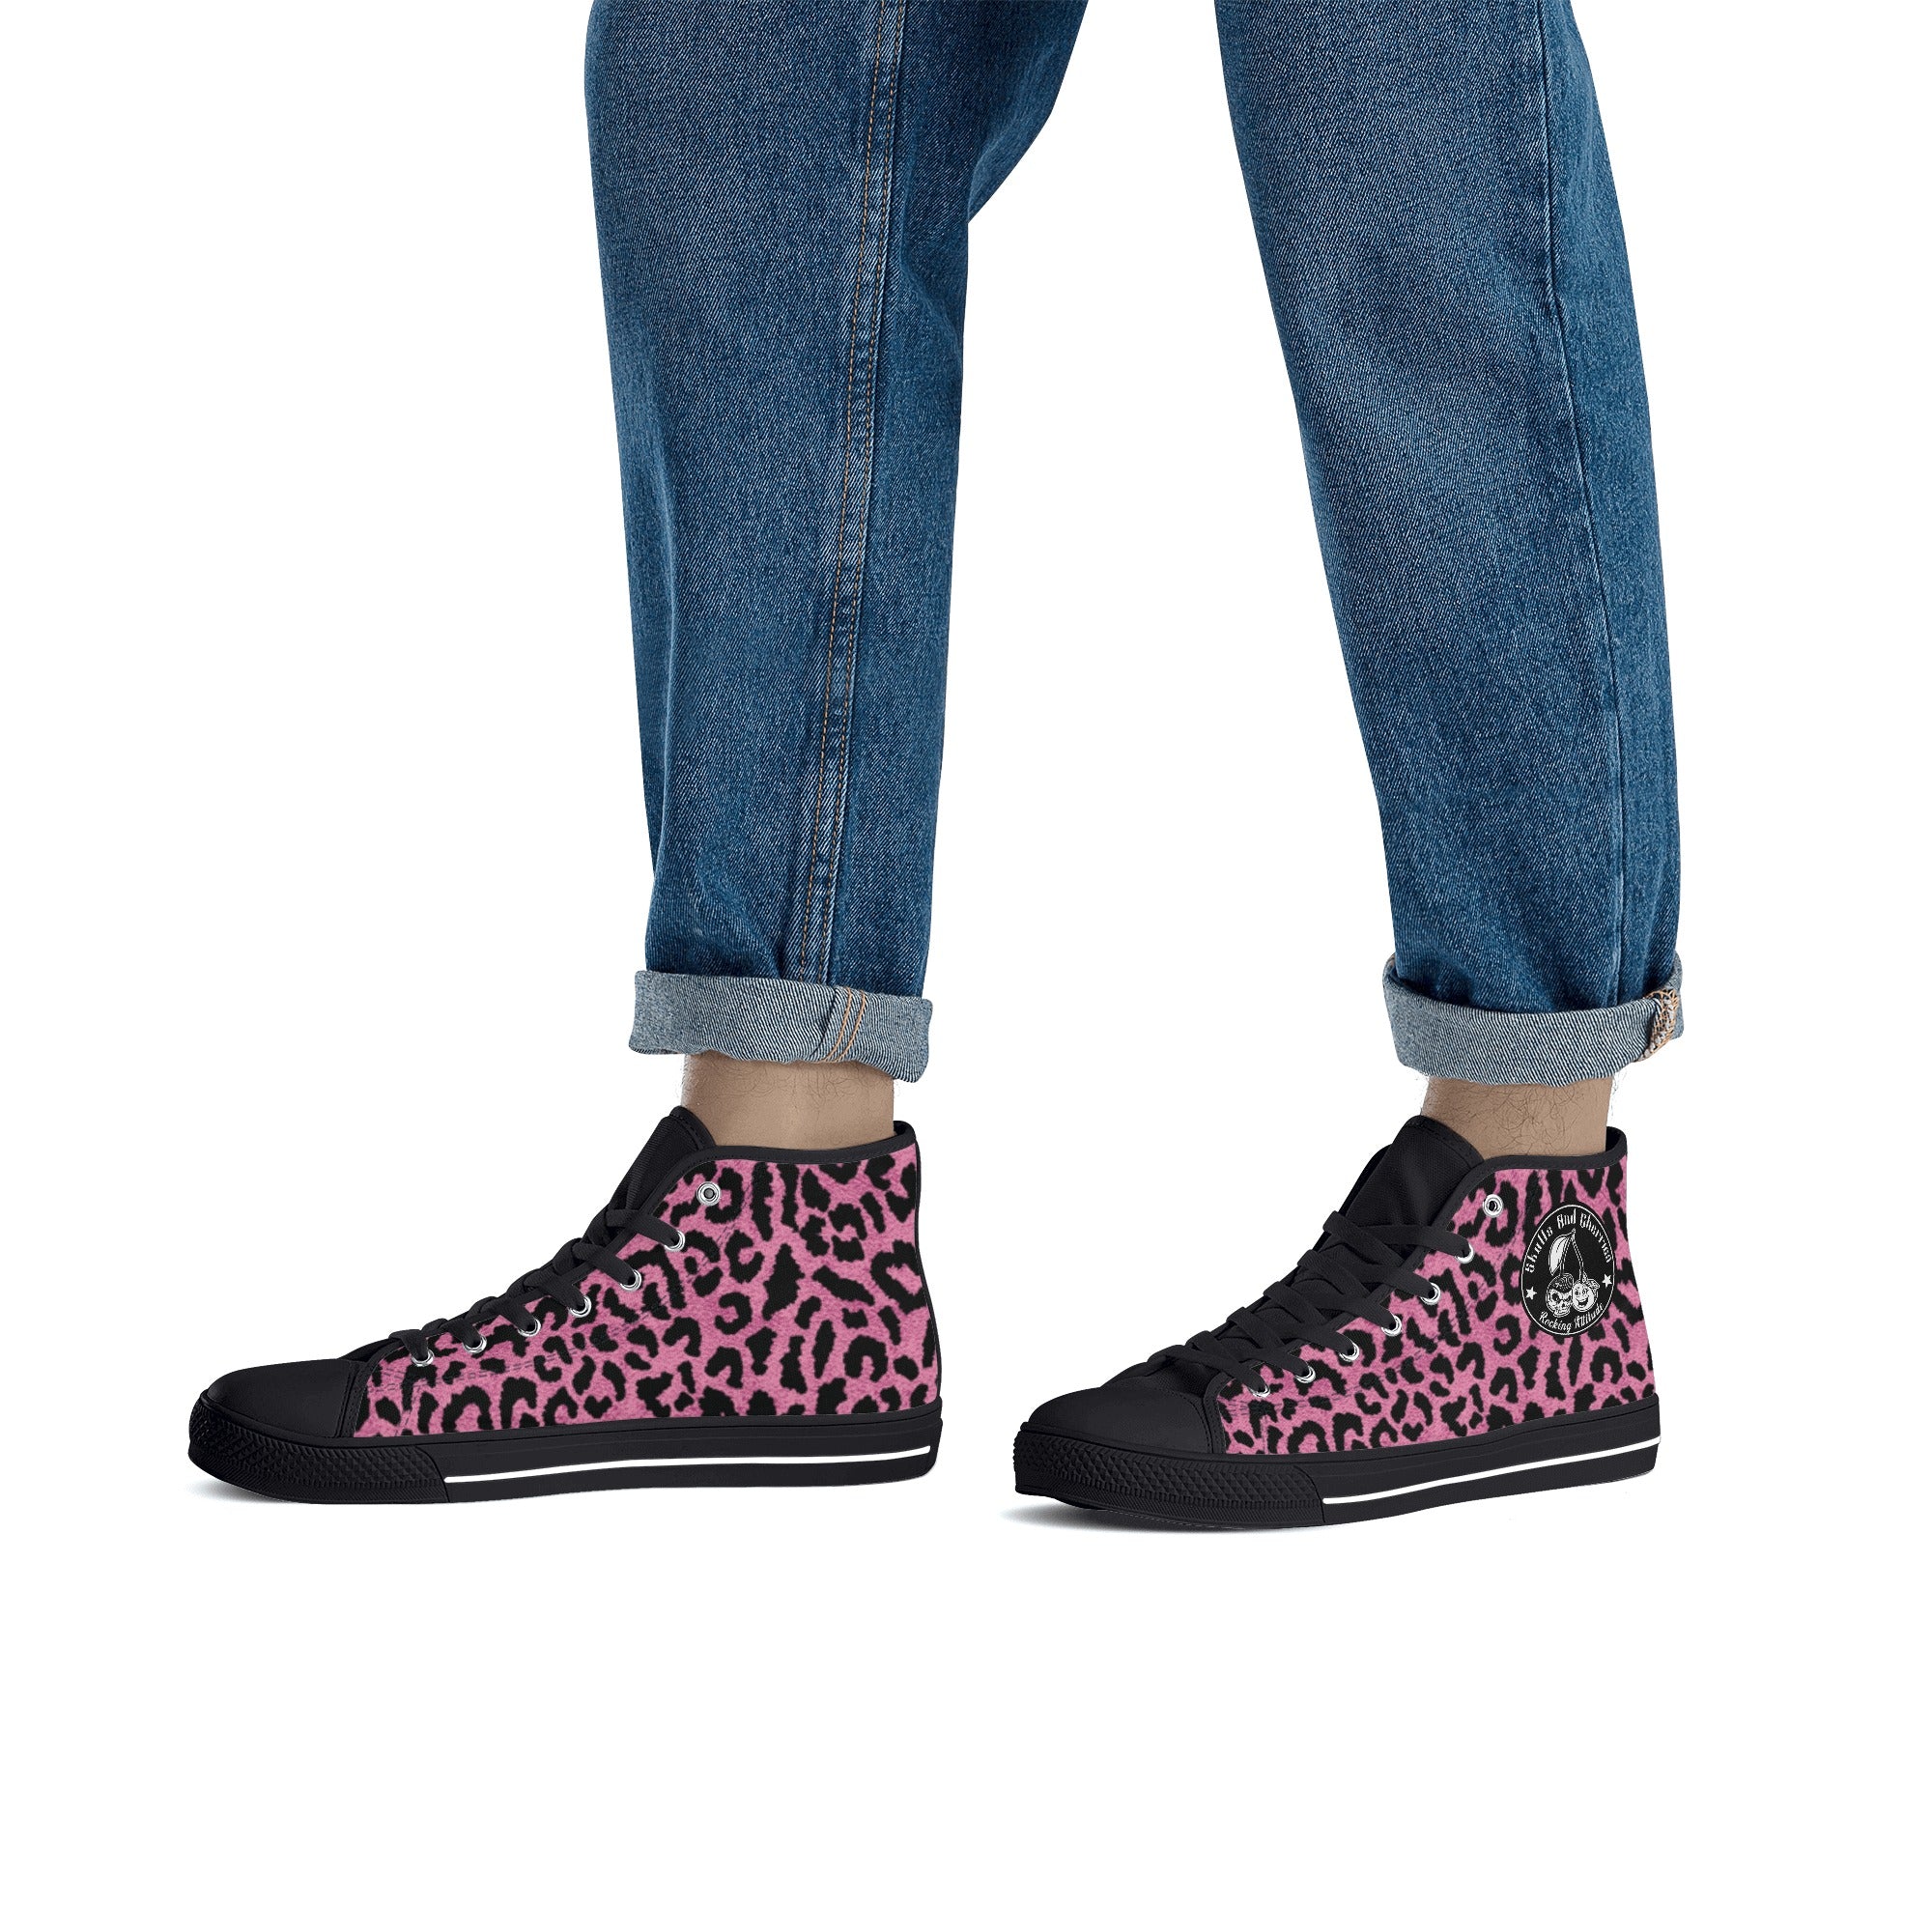 Pink Leopard Animal Print Men's Psychobilly High Top Shoes